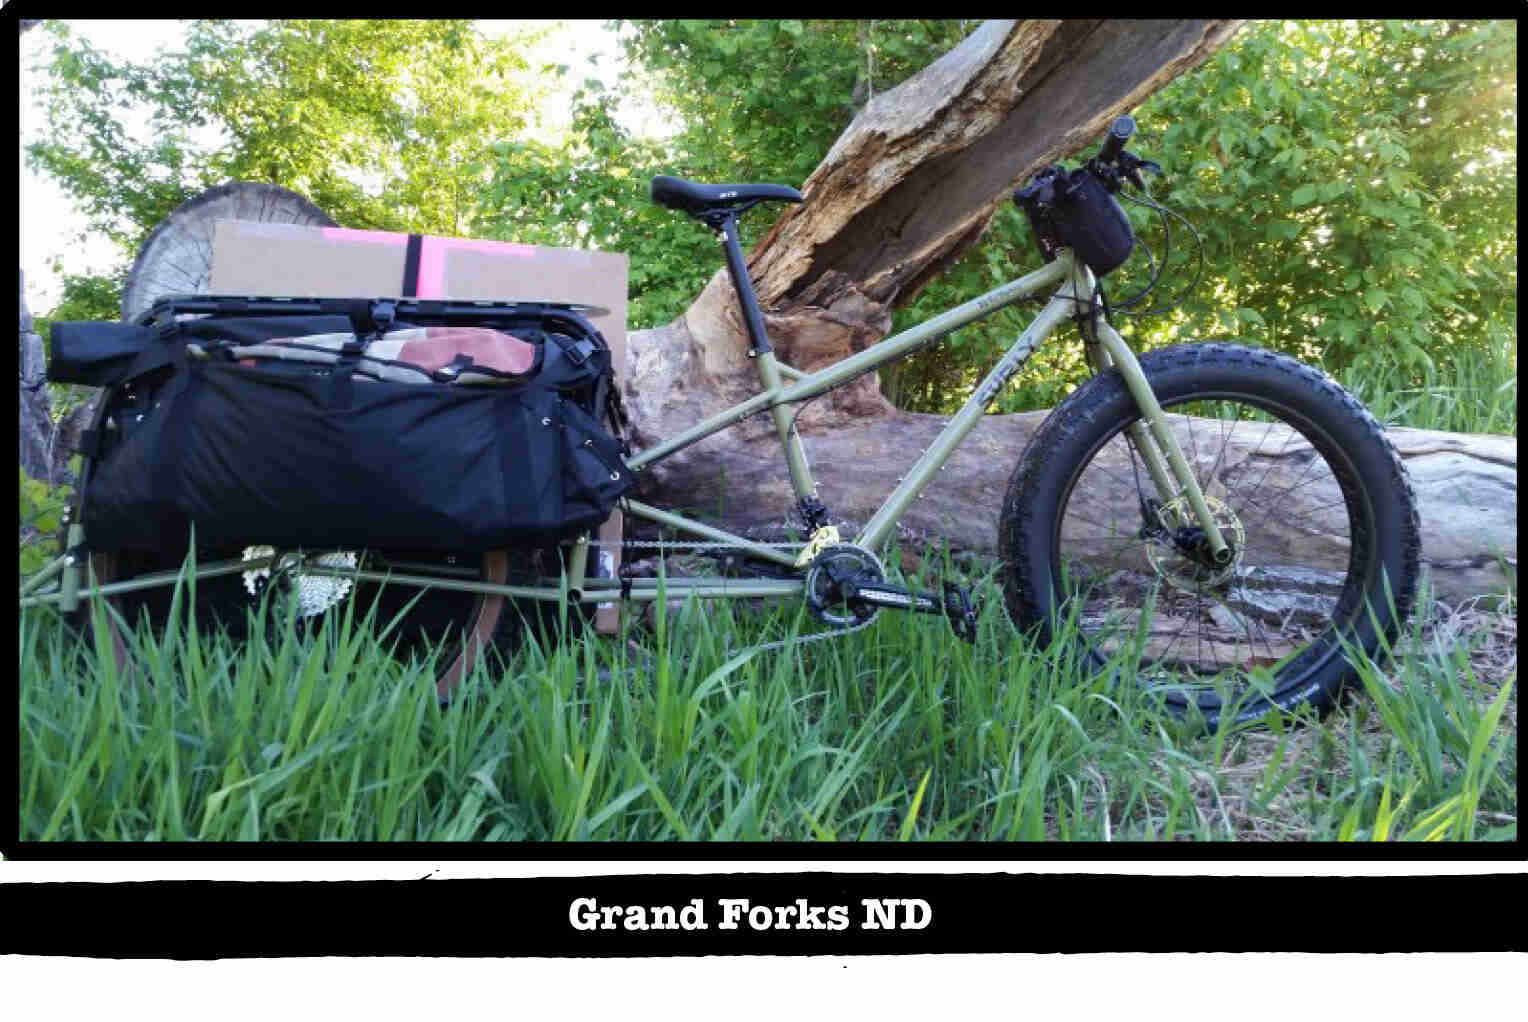 Right side view of a Surly Big Fat Dummy bike in the weeds, with trees in the background - Grand Forks ND tag below image